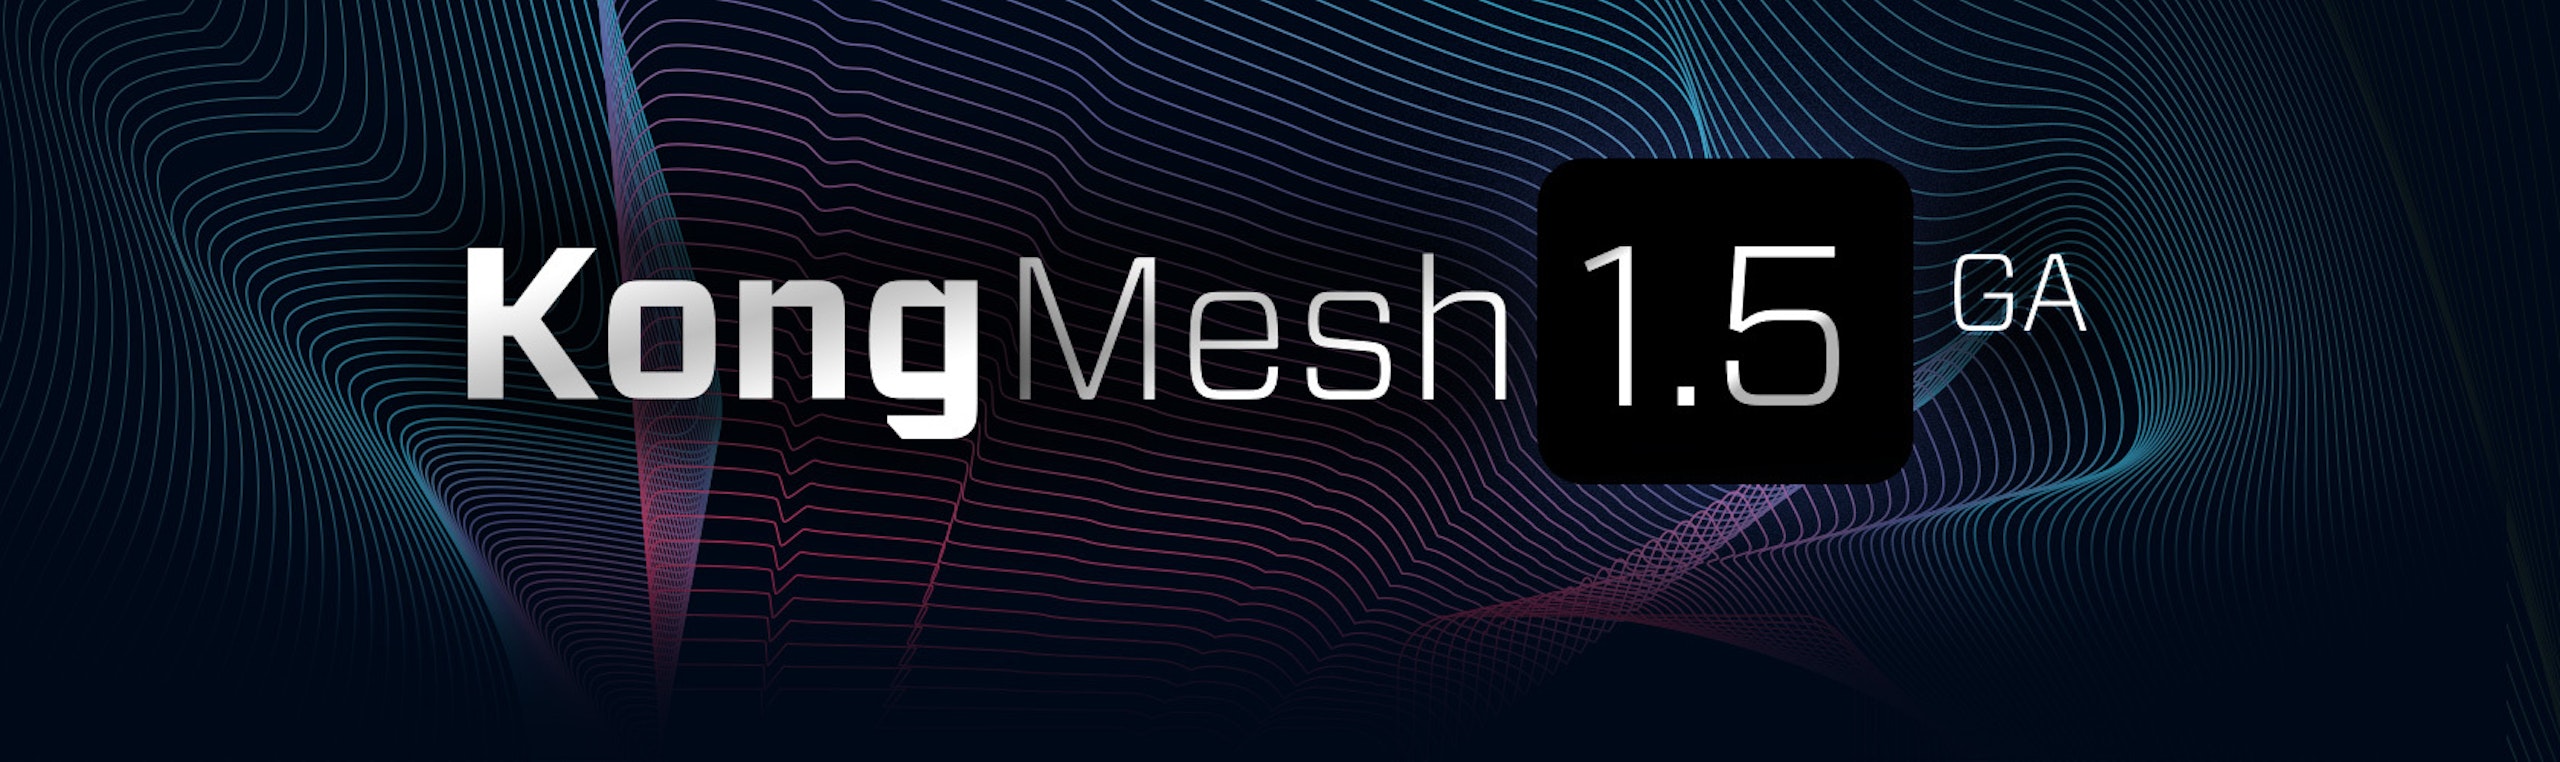 Kuma 1.4 and Kong Mesh 1.5 Released With RBAC, Windows Support, 2x Performance and 25+ New Features